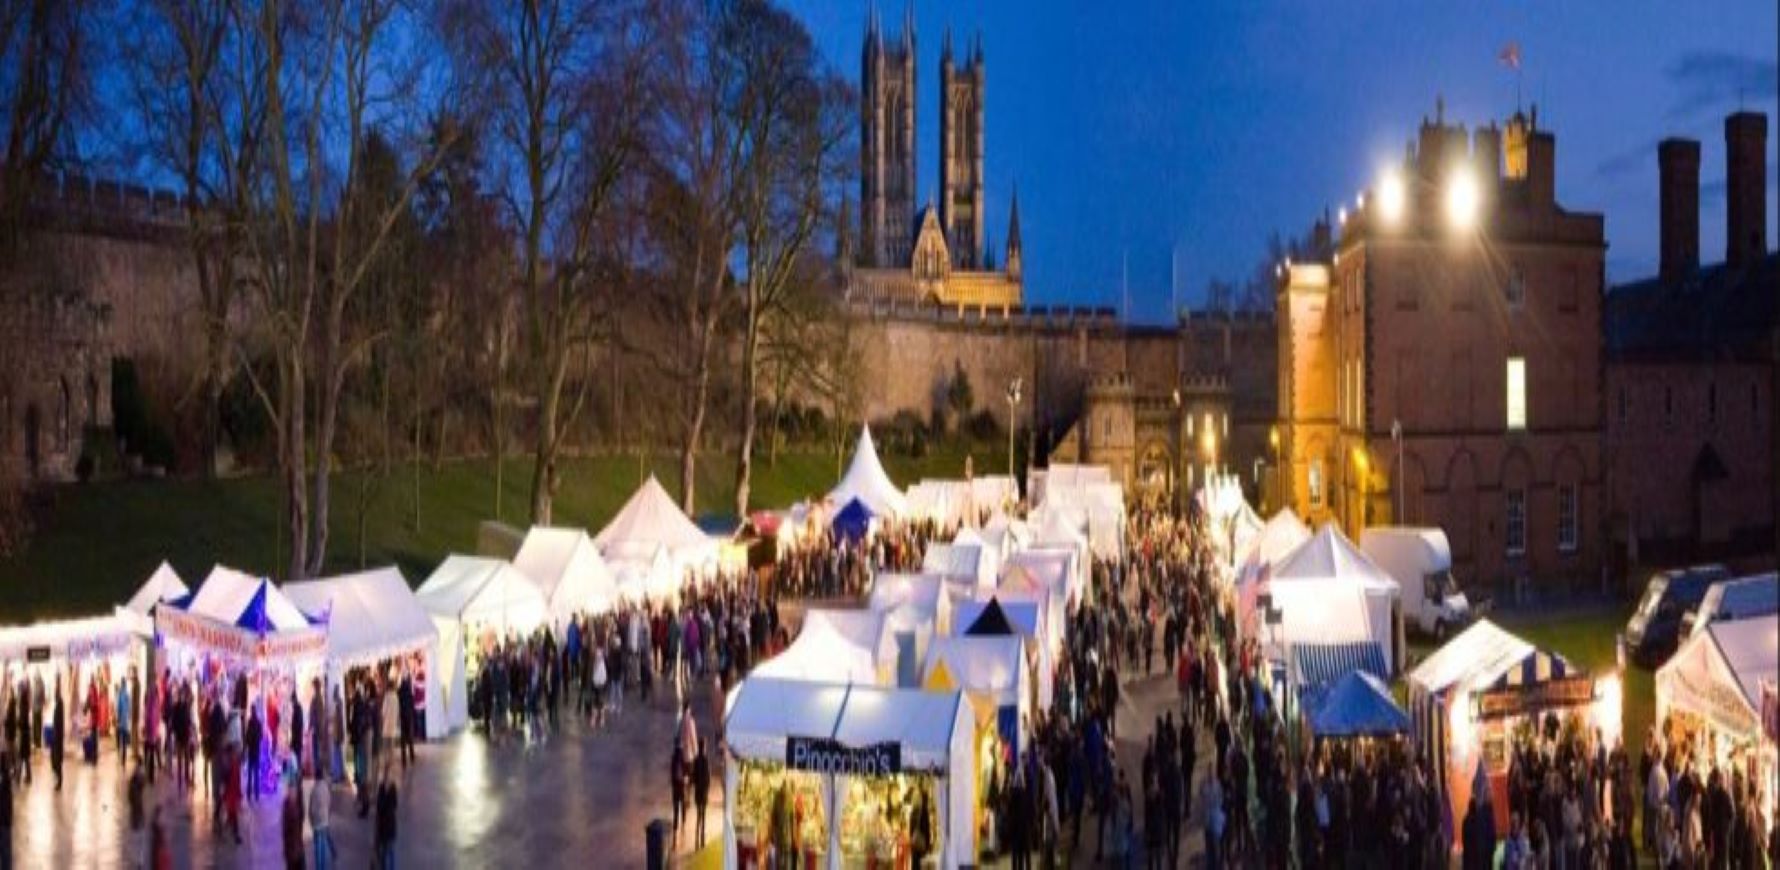 Lincoln Christmas Market The Association of English Cathedrals